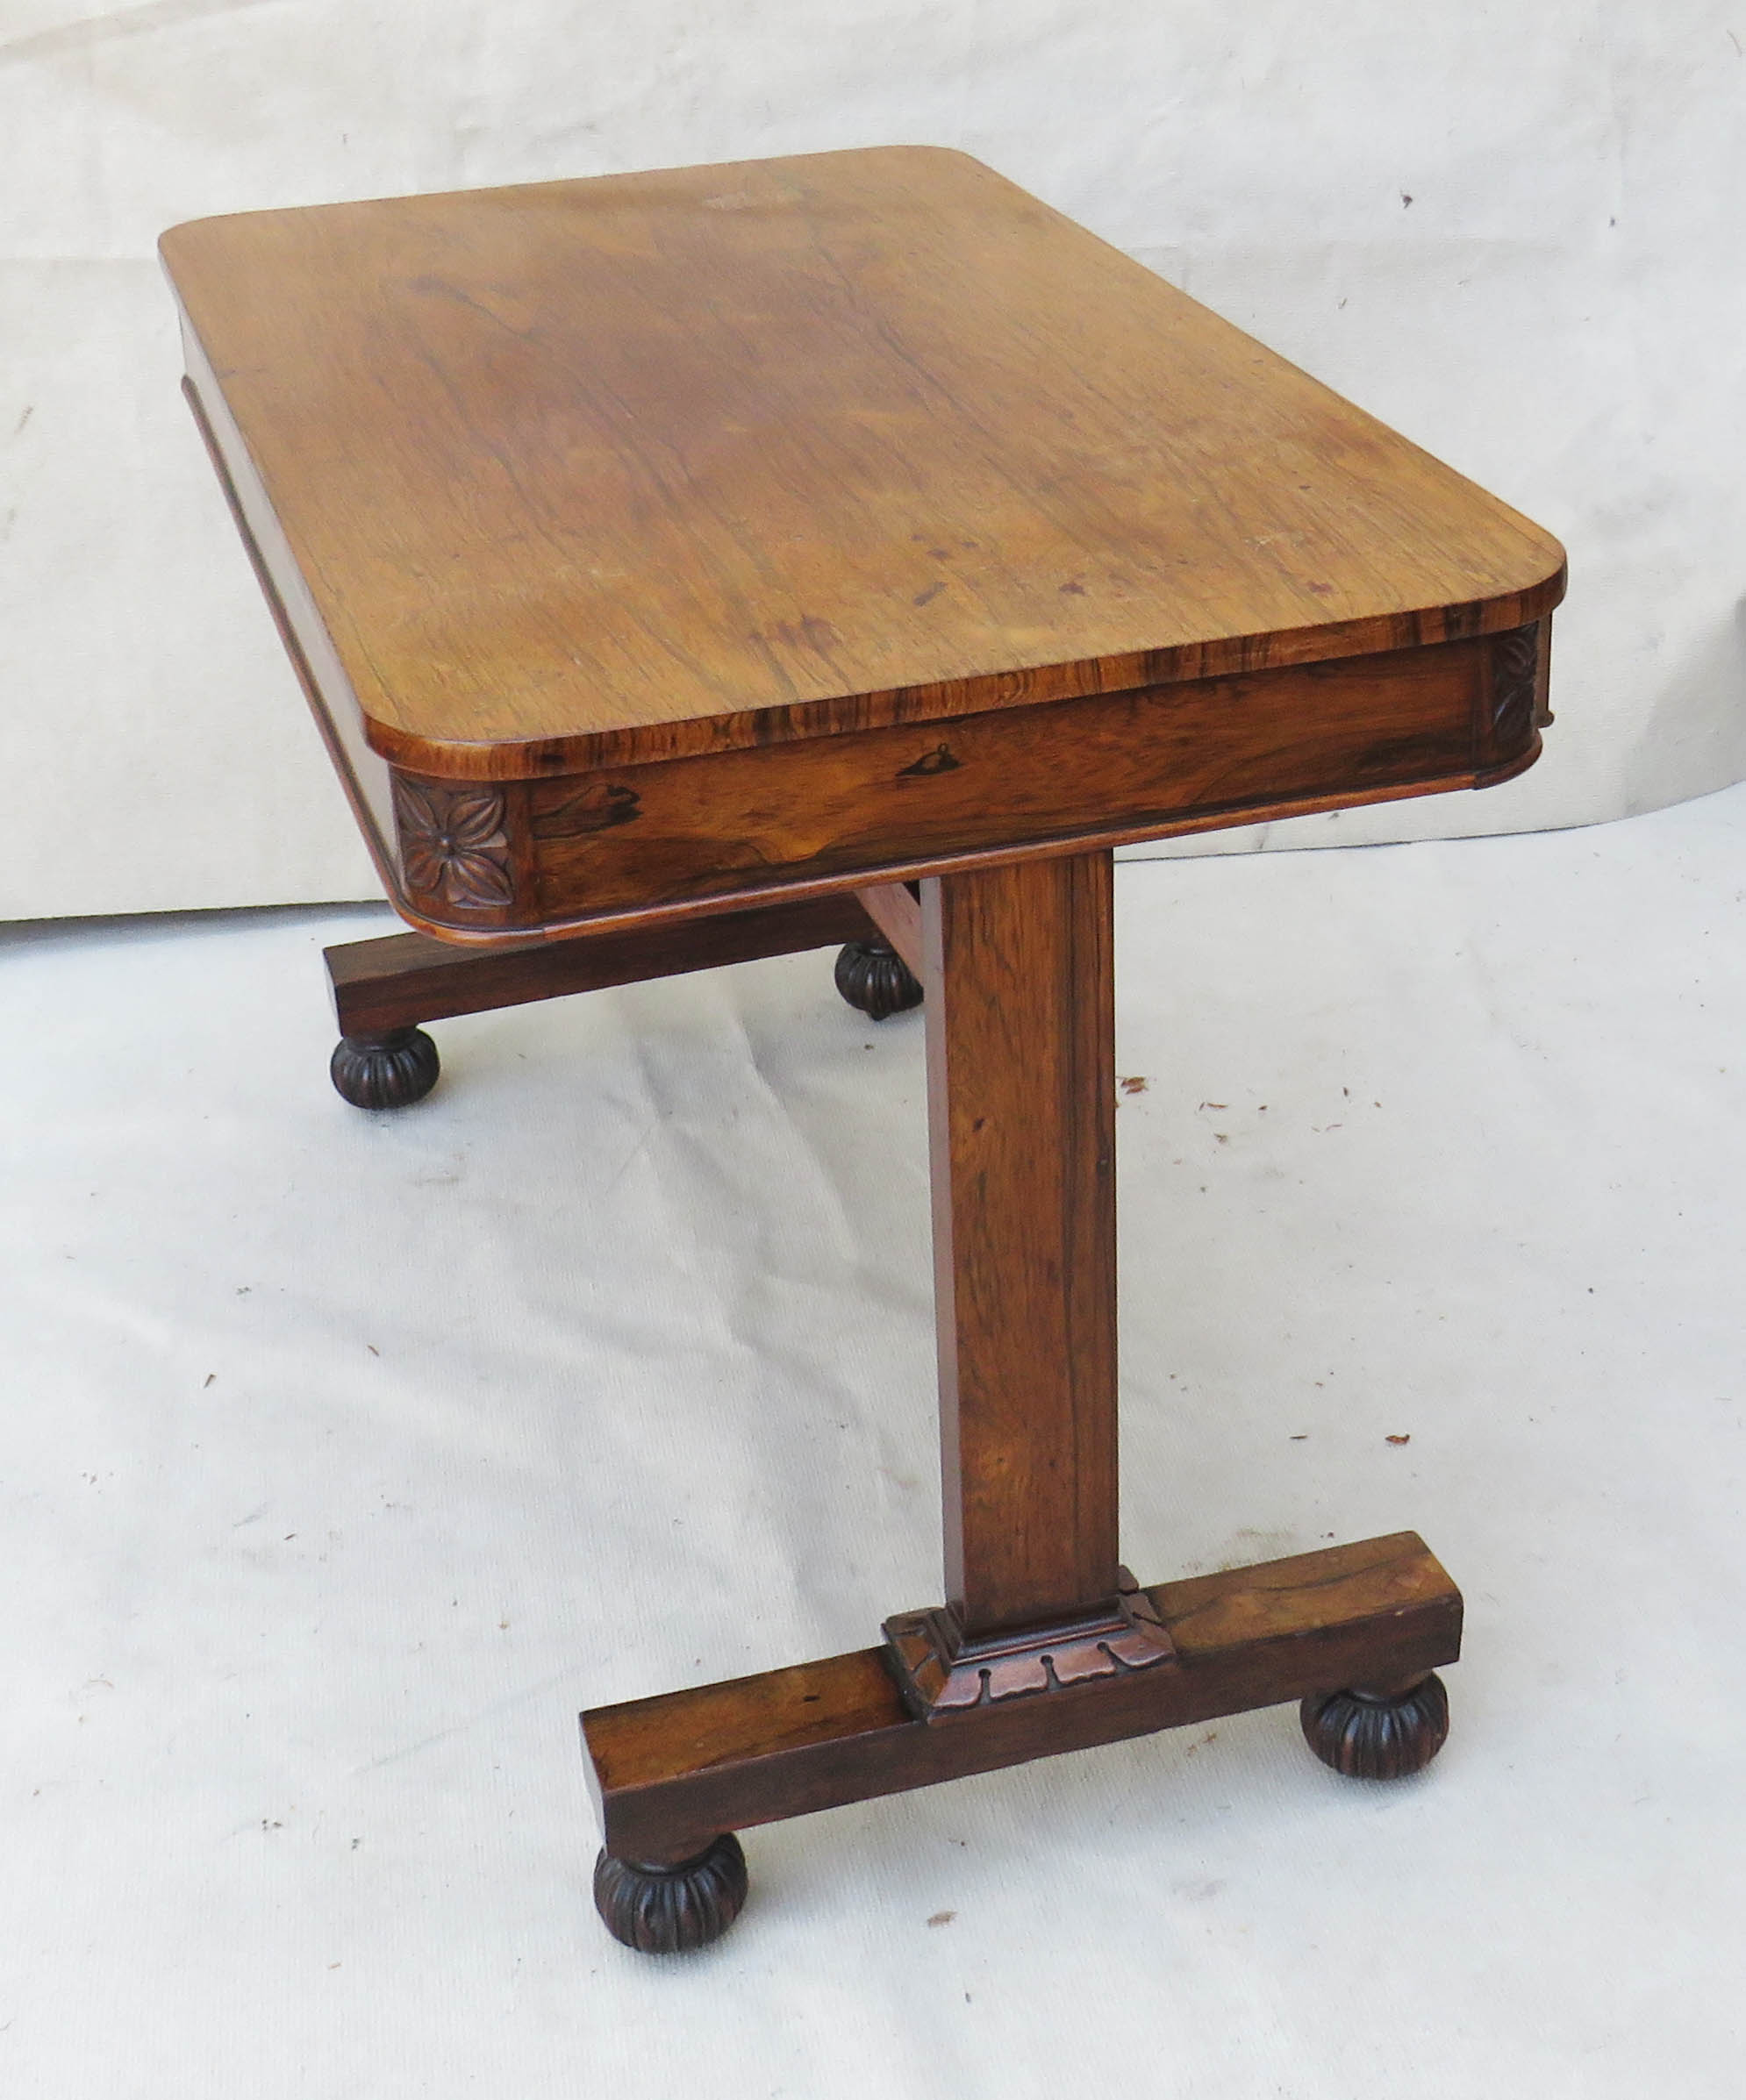 18th Century late Regency period rosewood library table - Image 5 of 8